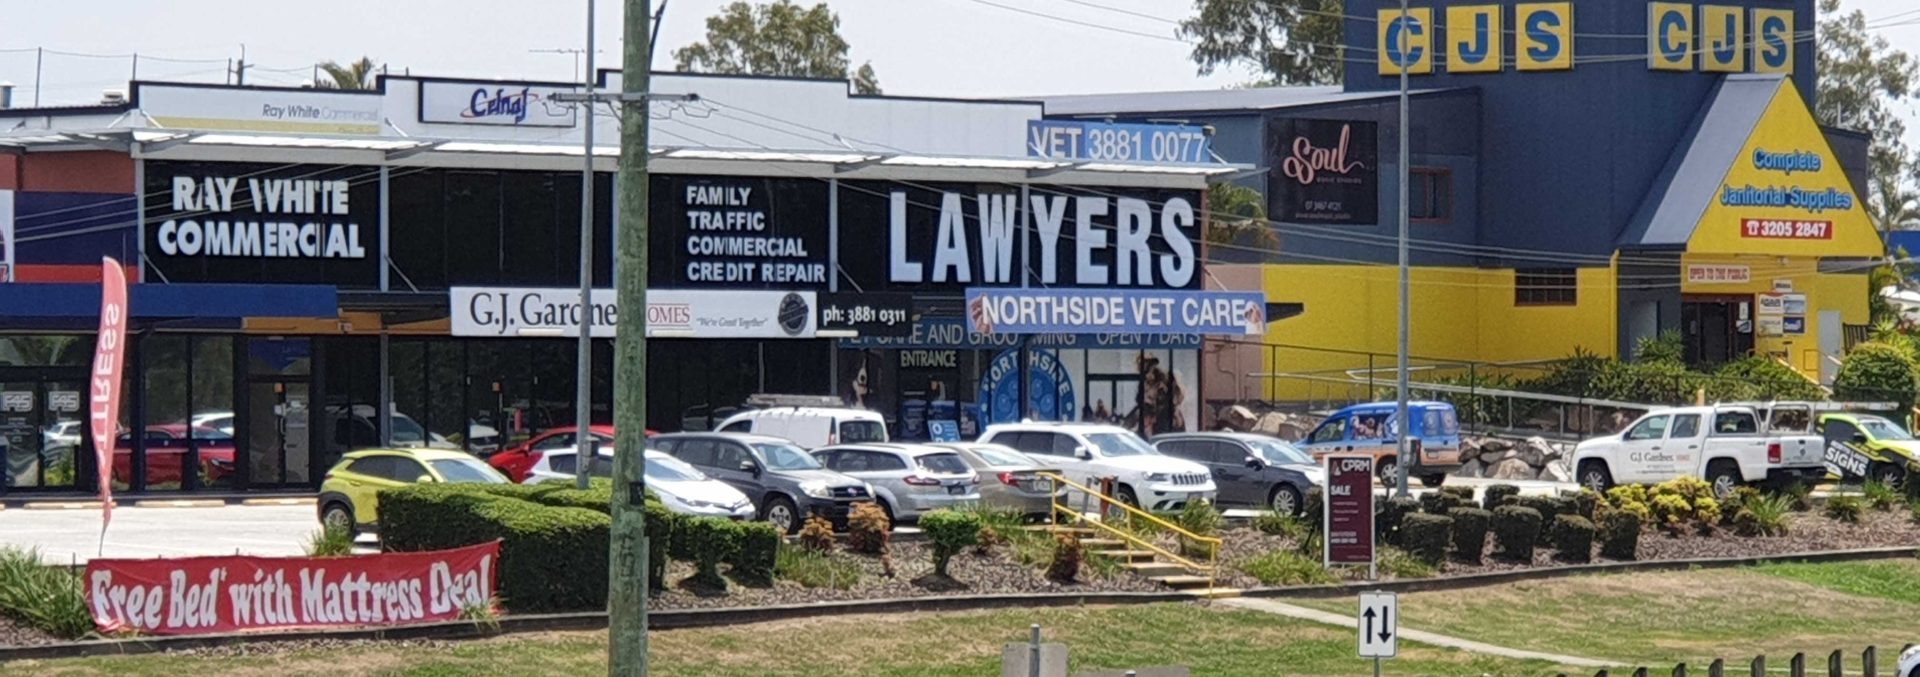 Big lawyers sign on gympie road strathpine | ads law | Armstrong Doessel Stevenson Lawyers | 07 3088 3777